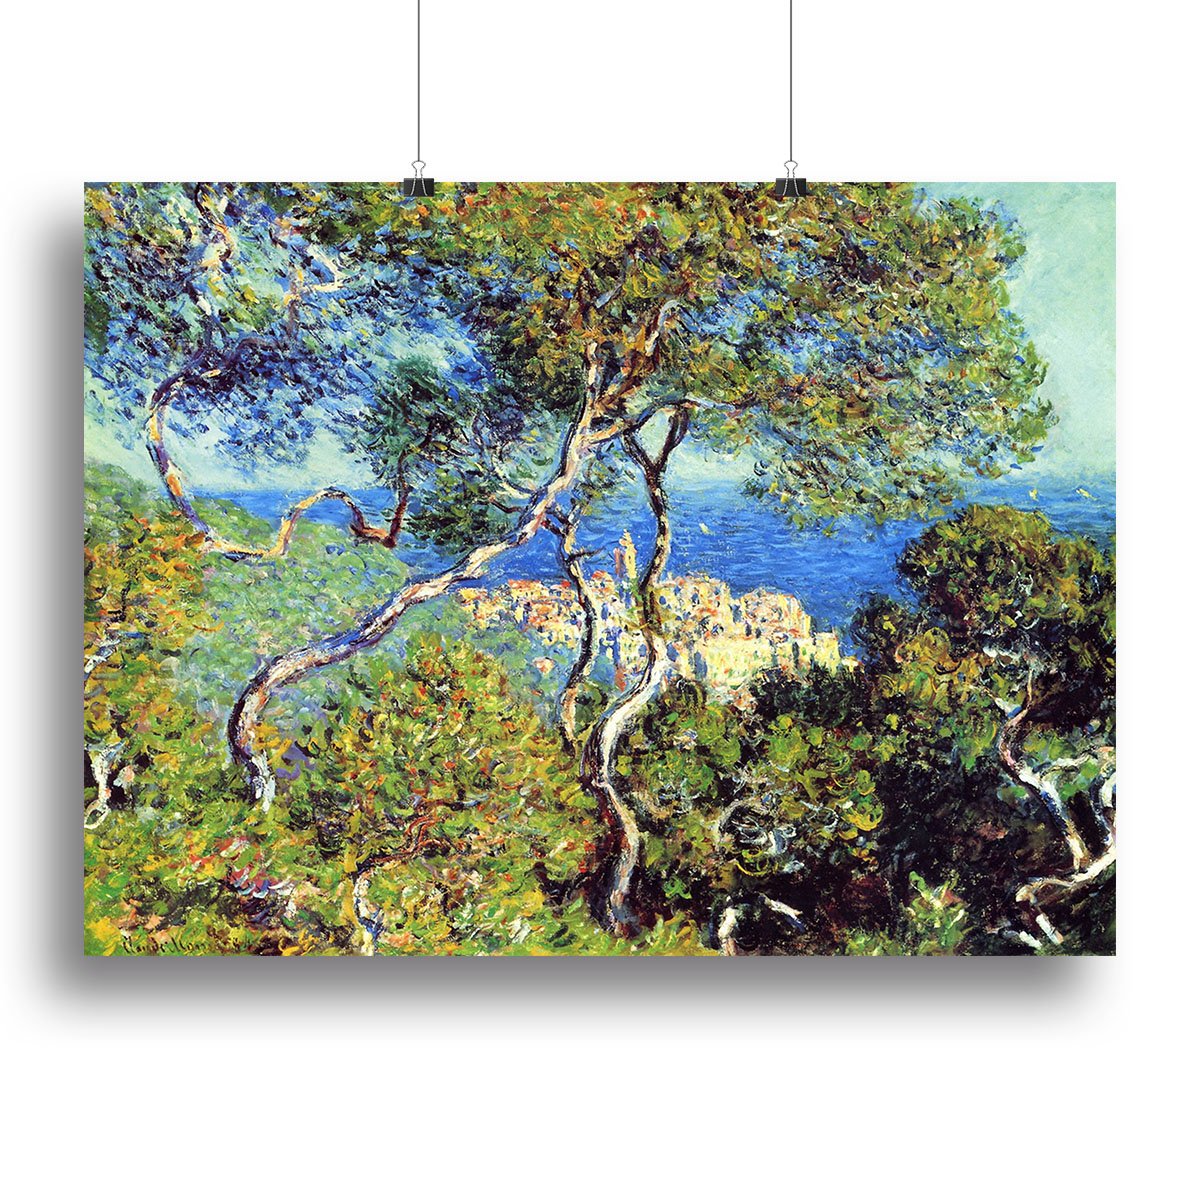 Bordighera by Monet Canvas Print or Poster